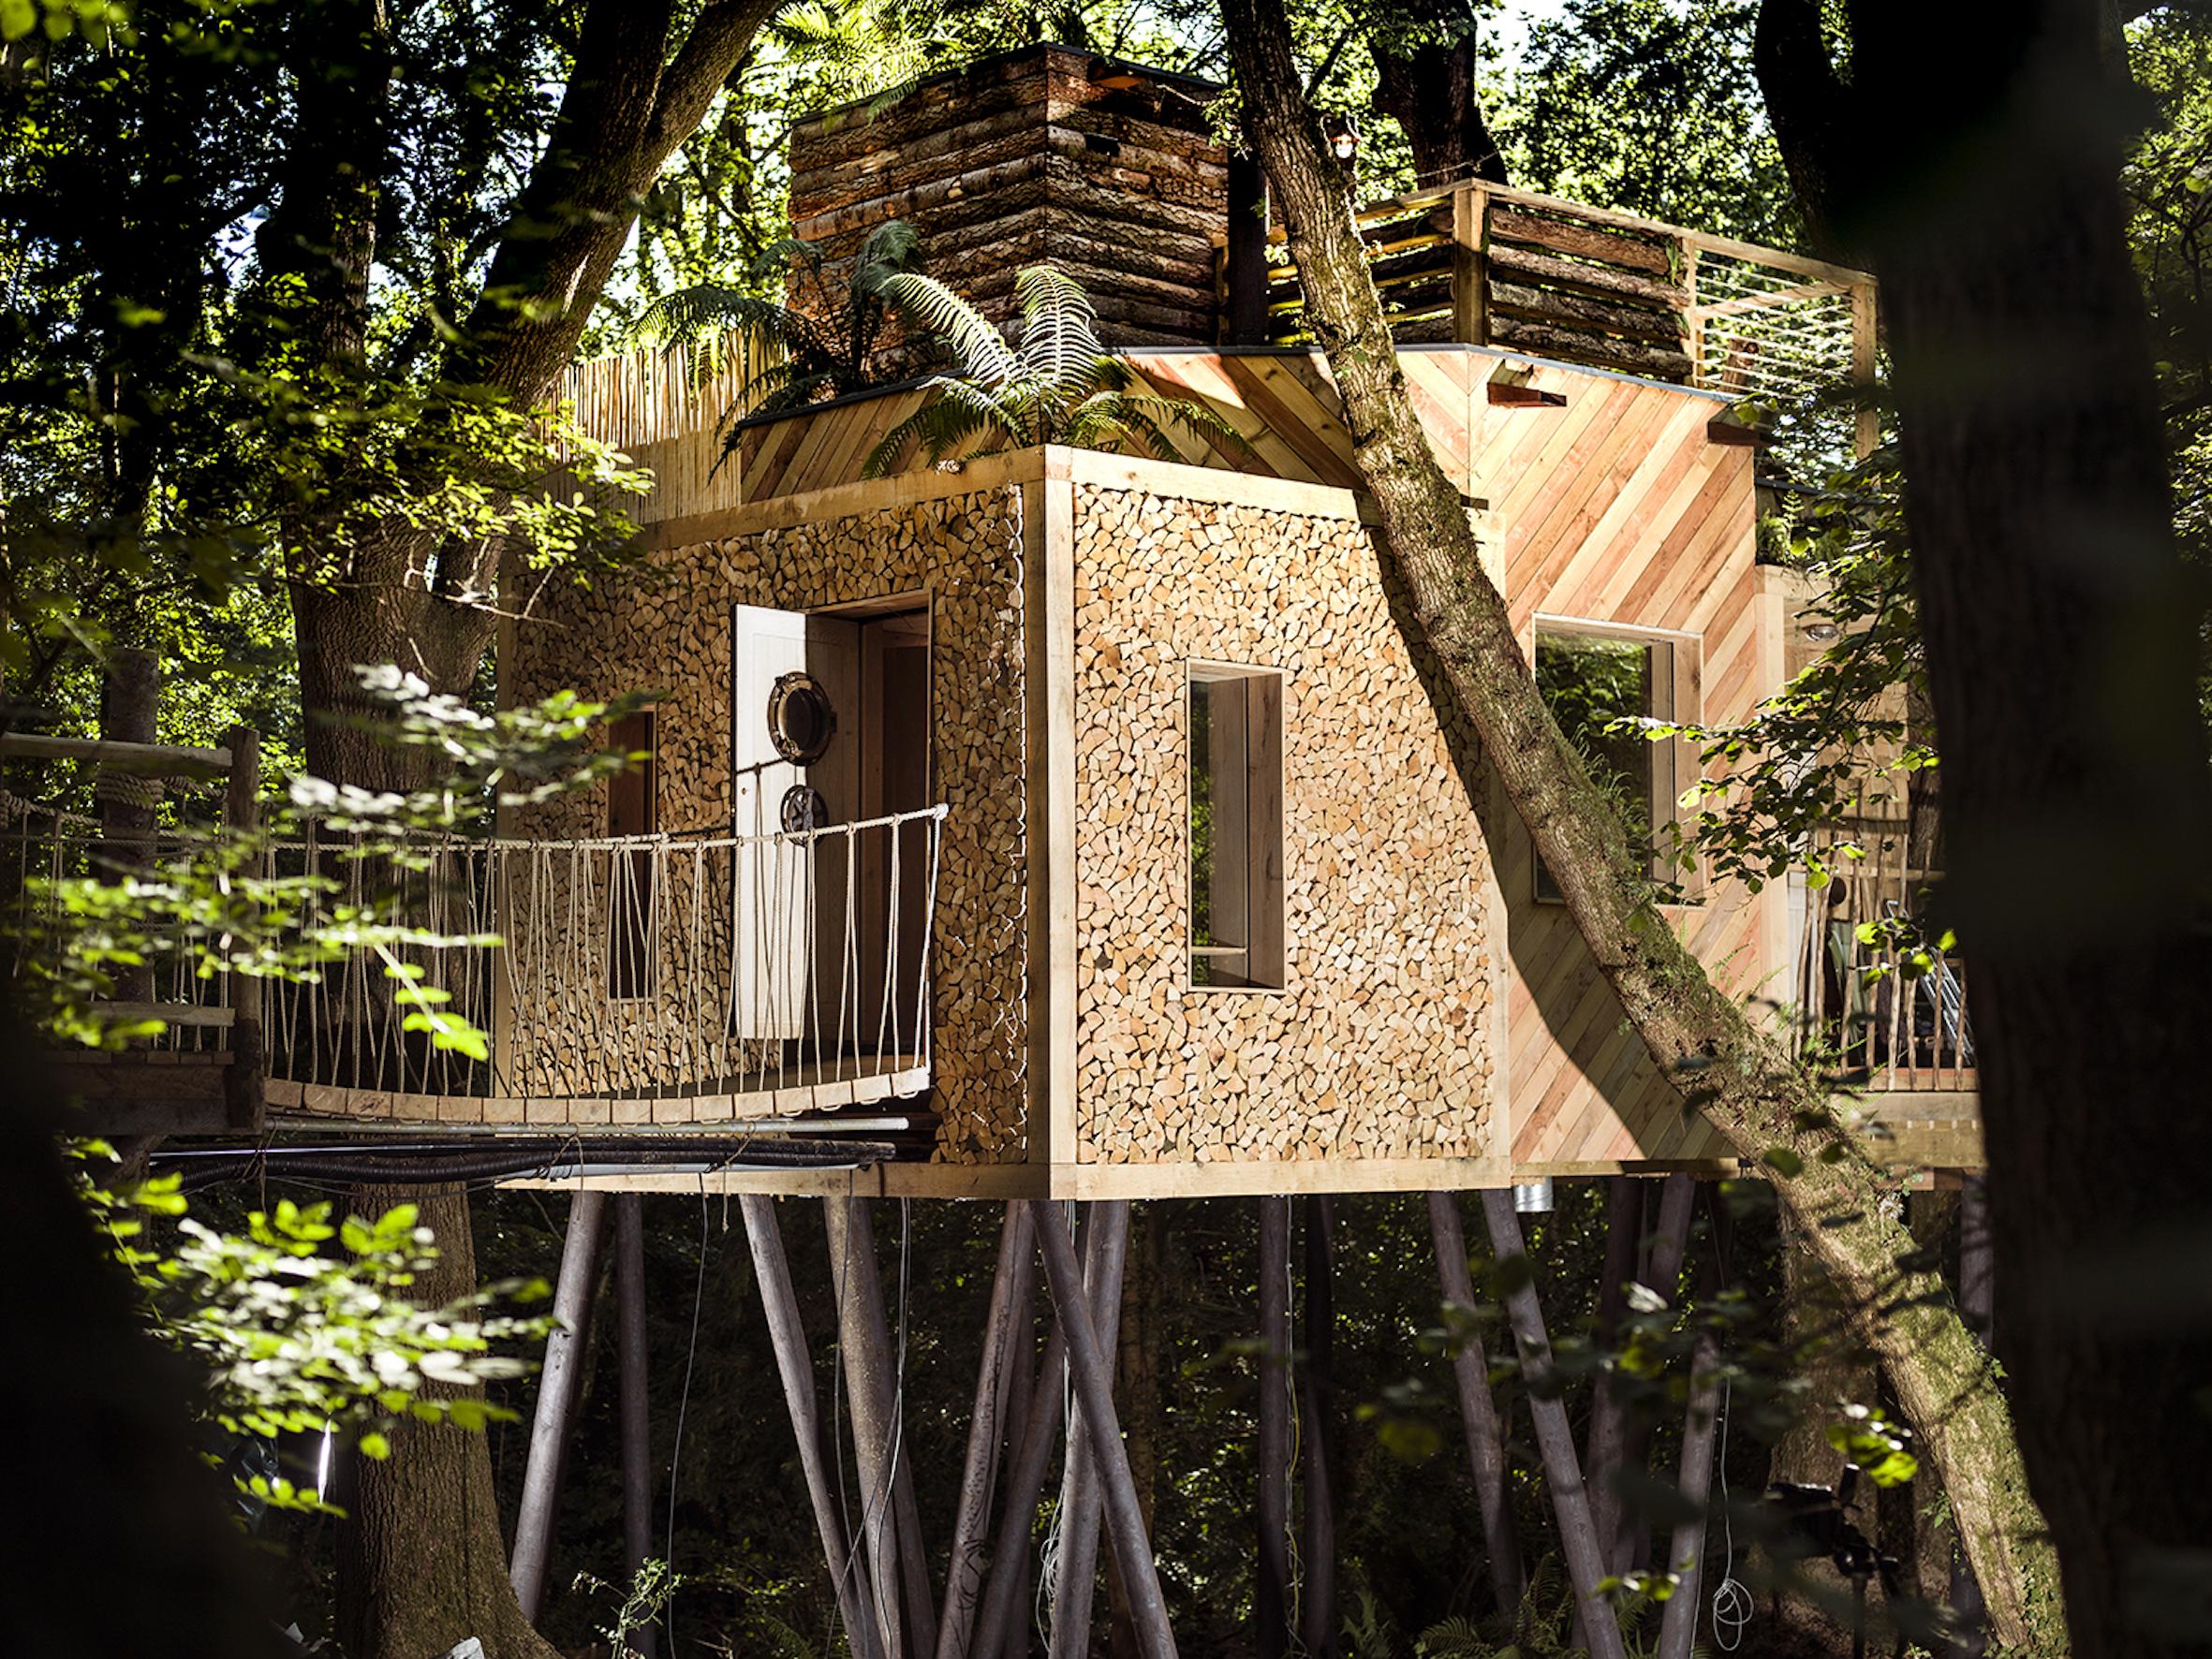 The Woodsman's aims to be the most luxurious treehouse possible